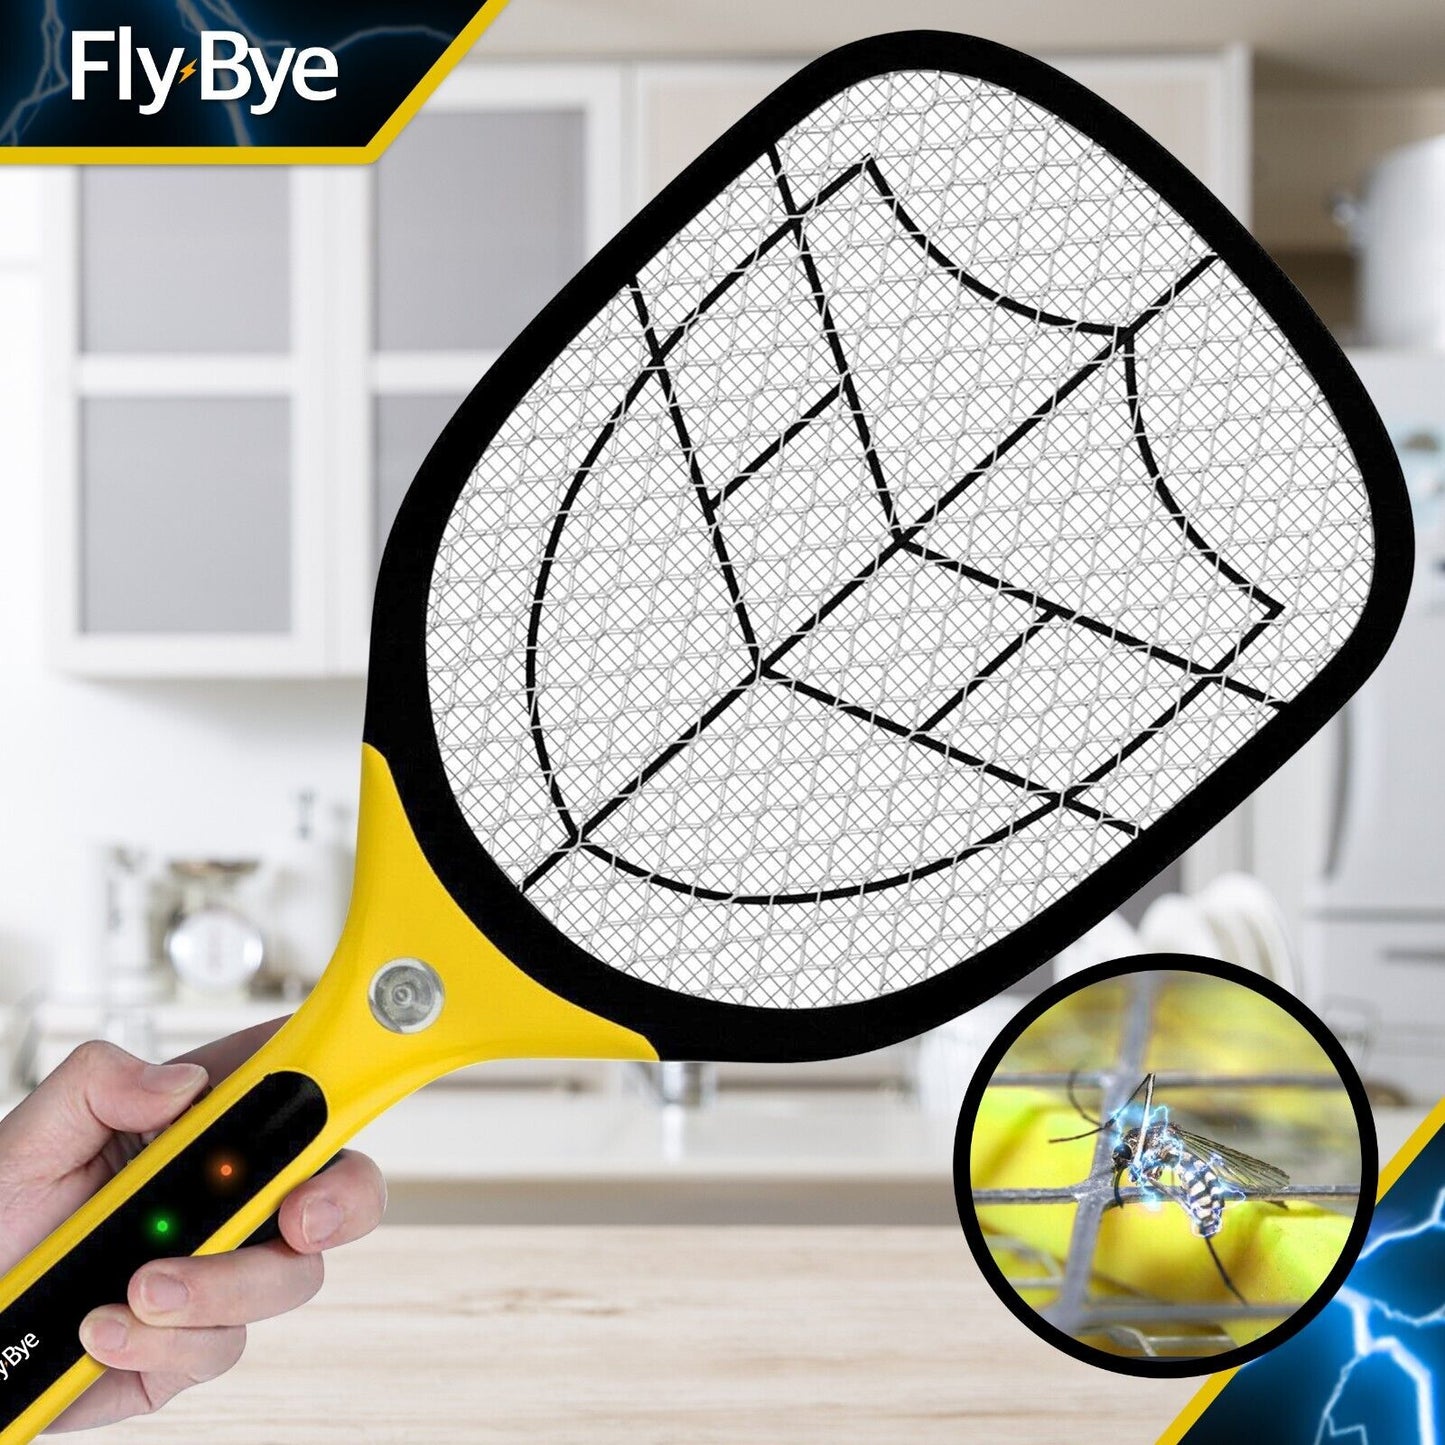 Electric Fly Killer Bug Zapper Racket Mosquito Insect Pest Swatter Wasp Trap Bat